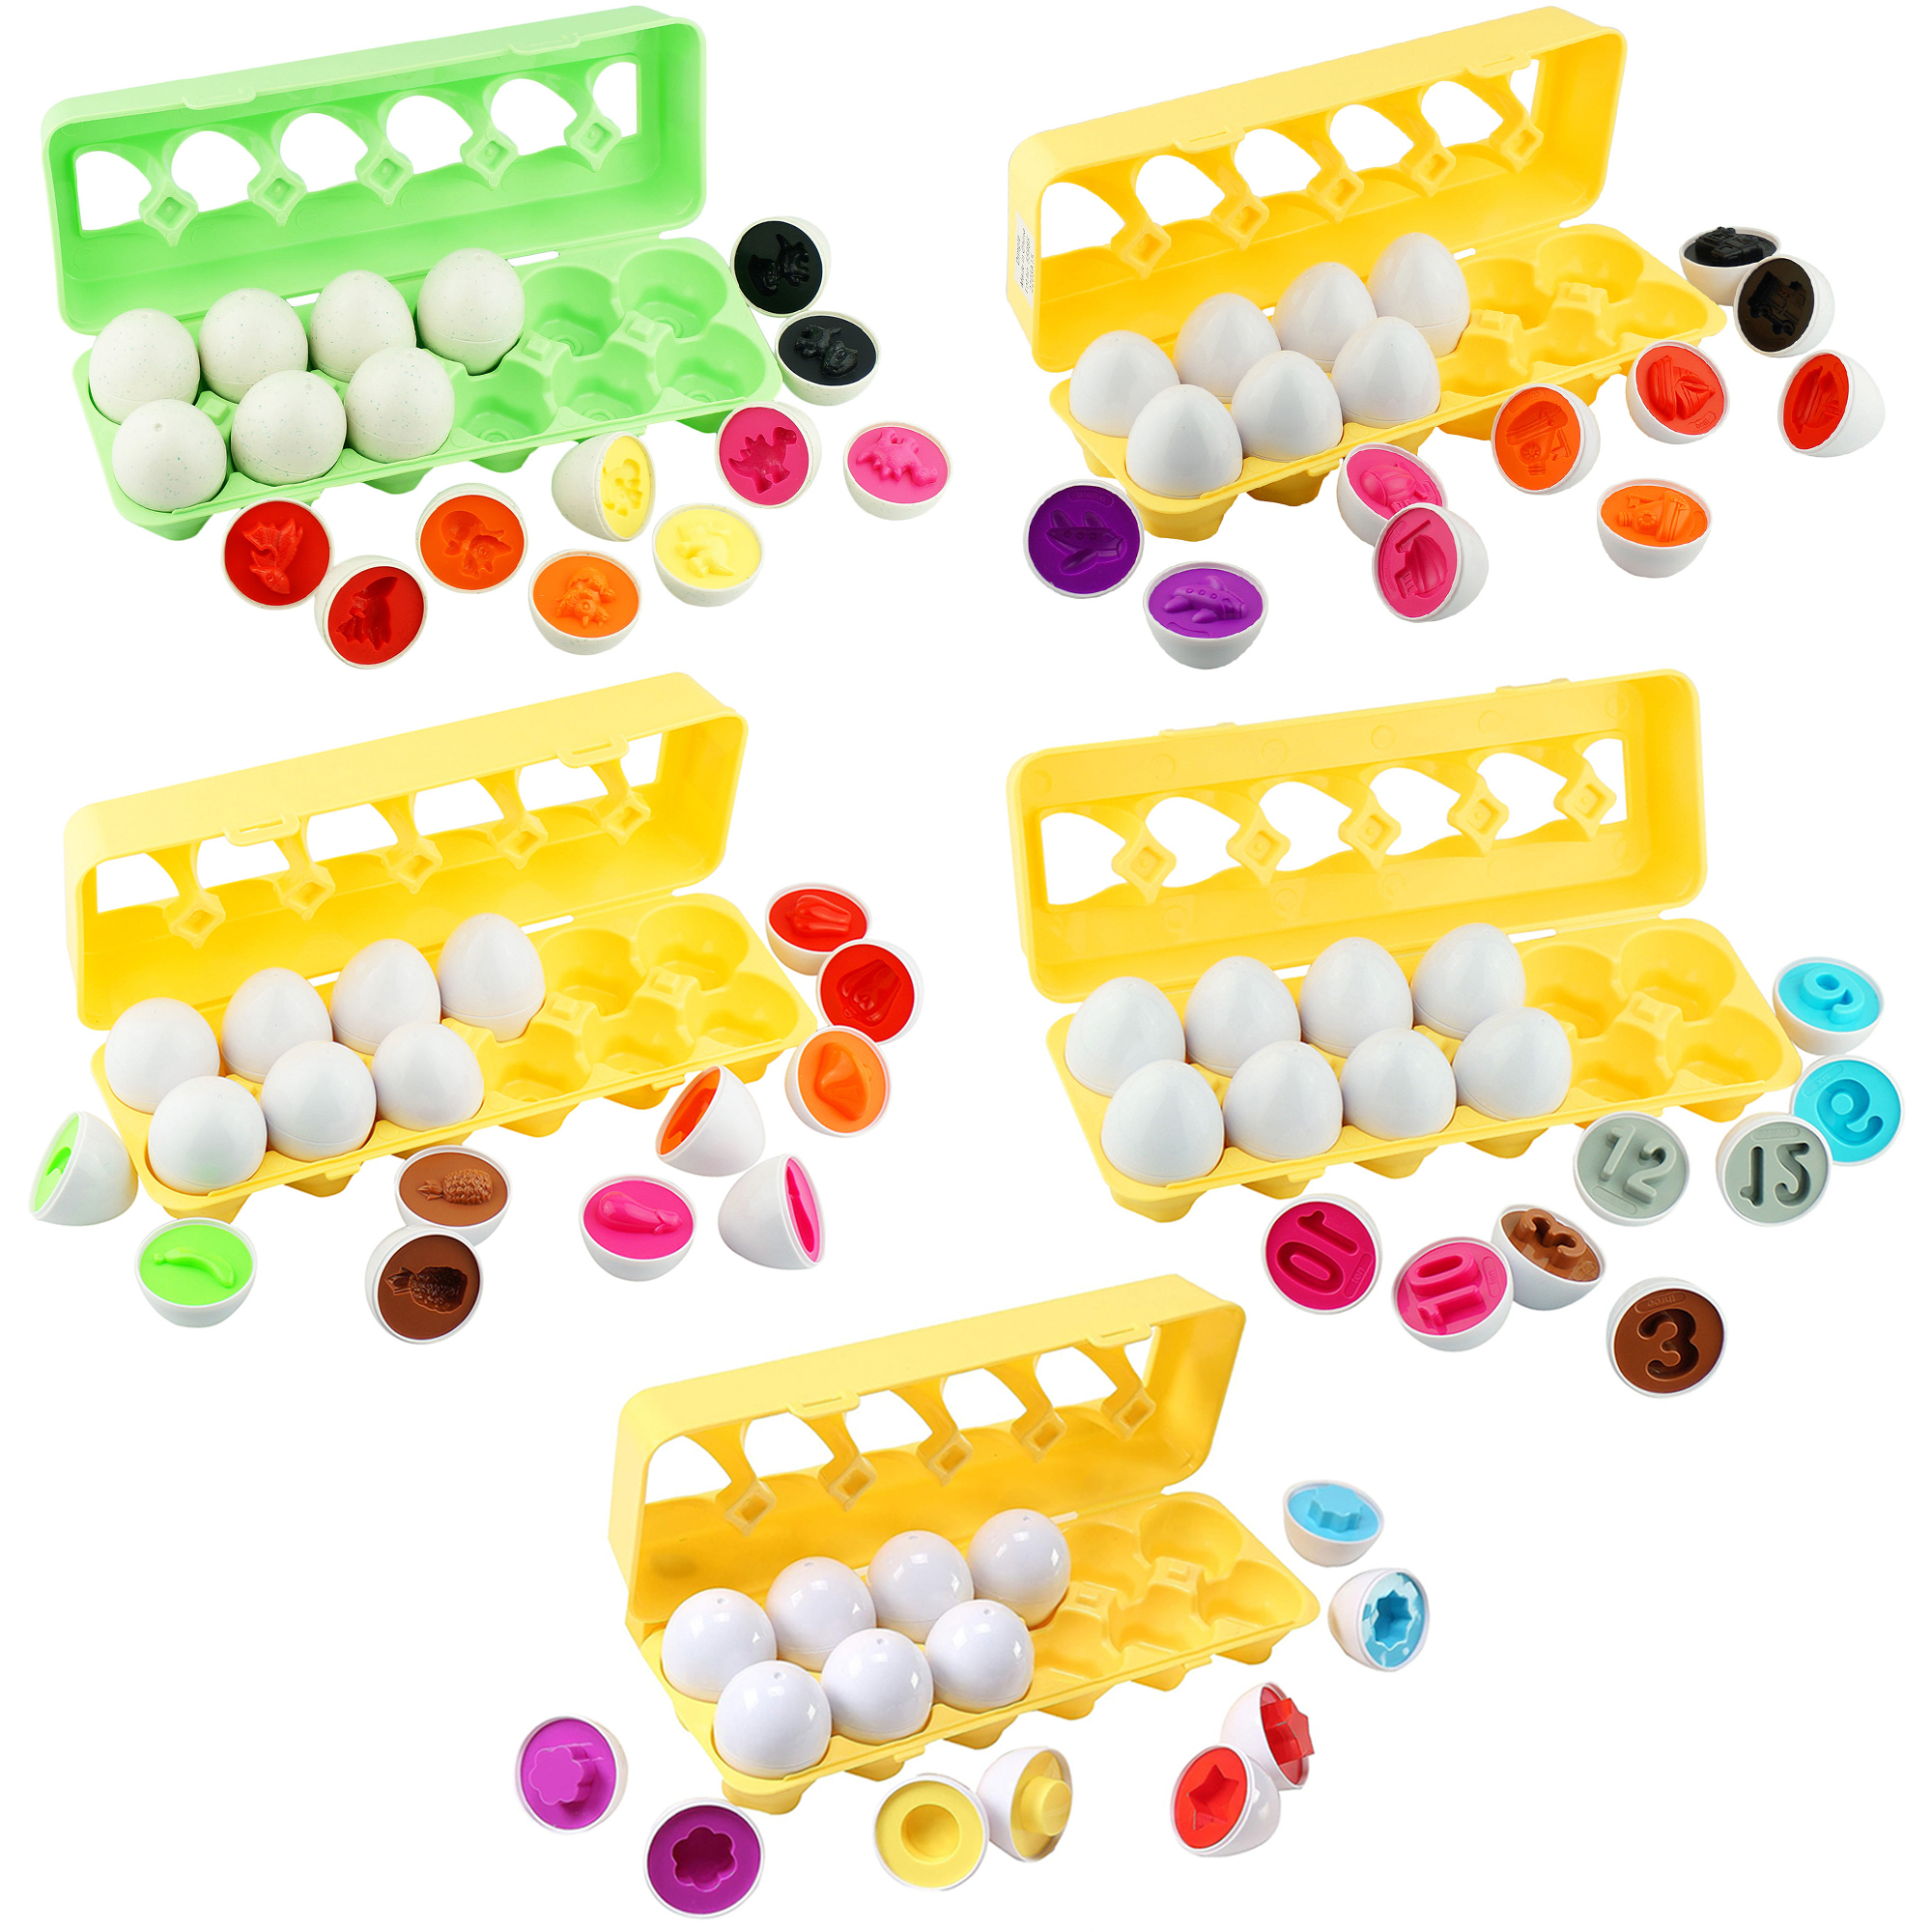 Dimple Fun Egg Matching Toy Set Of 5 (Total 60 Eggs) Toddler STEM Easter Eggs Toys -Shape, Numbers, Vegetable, Dinosaur